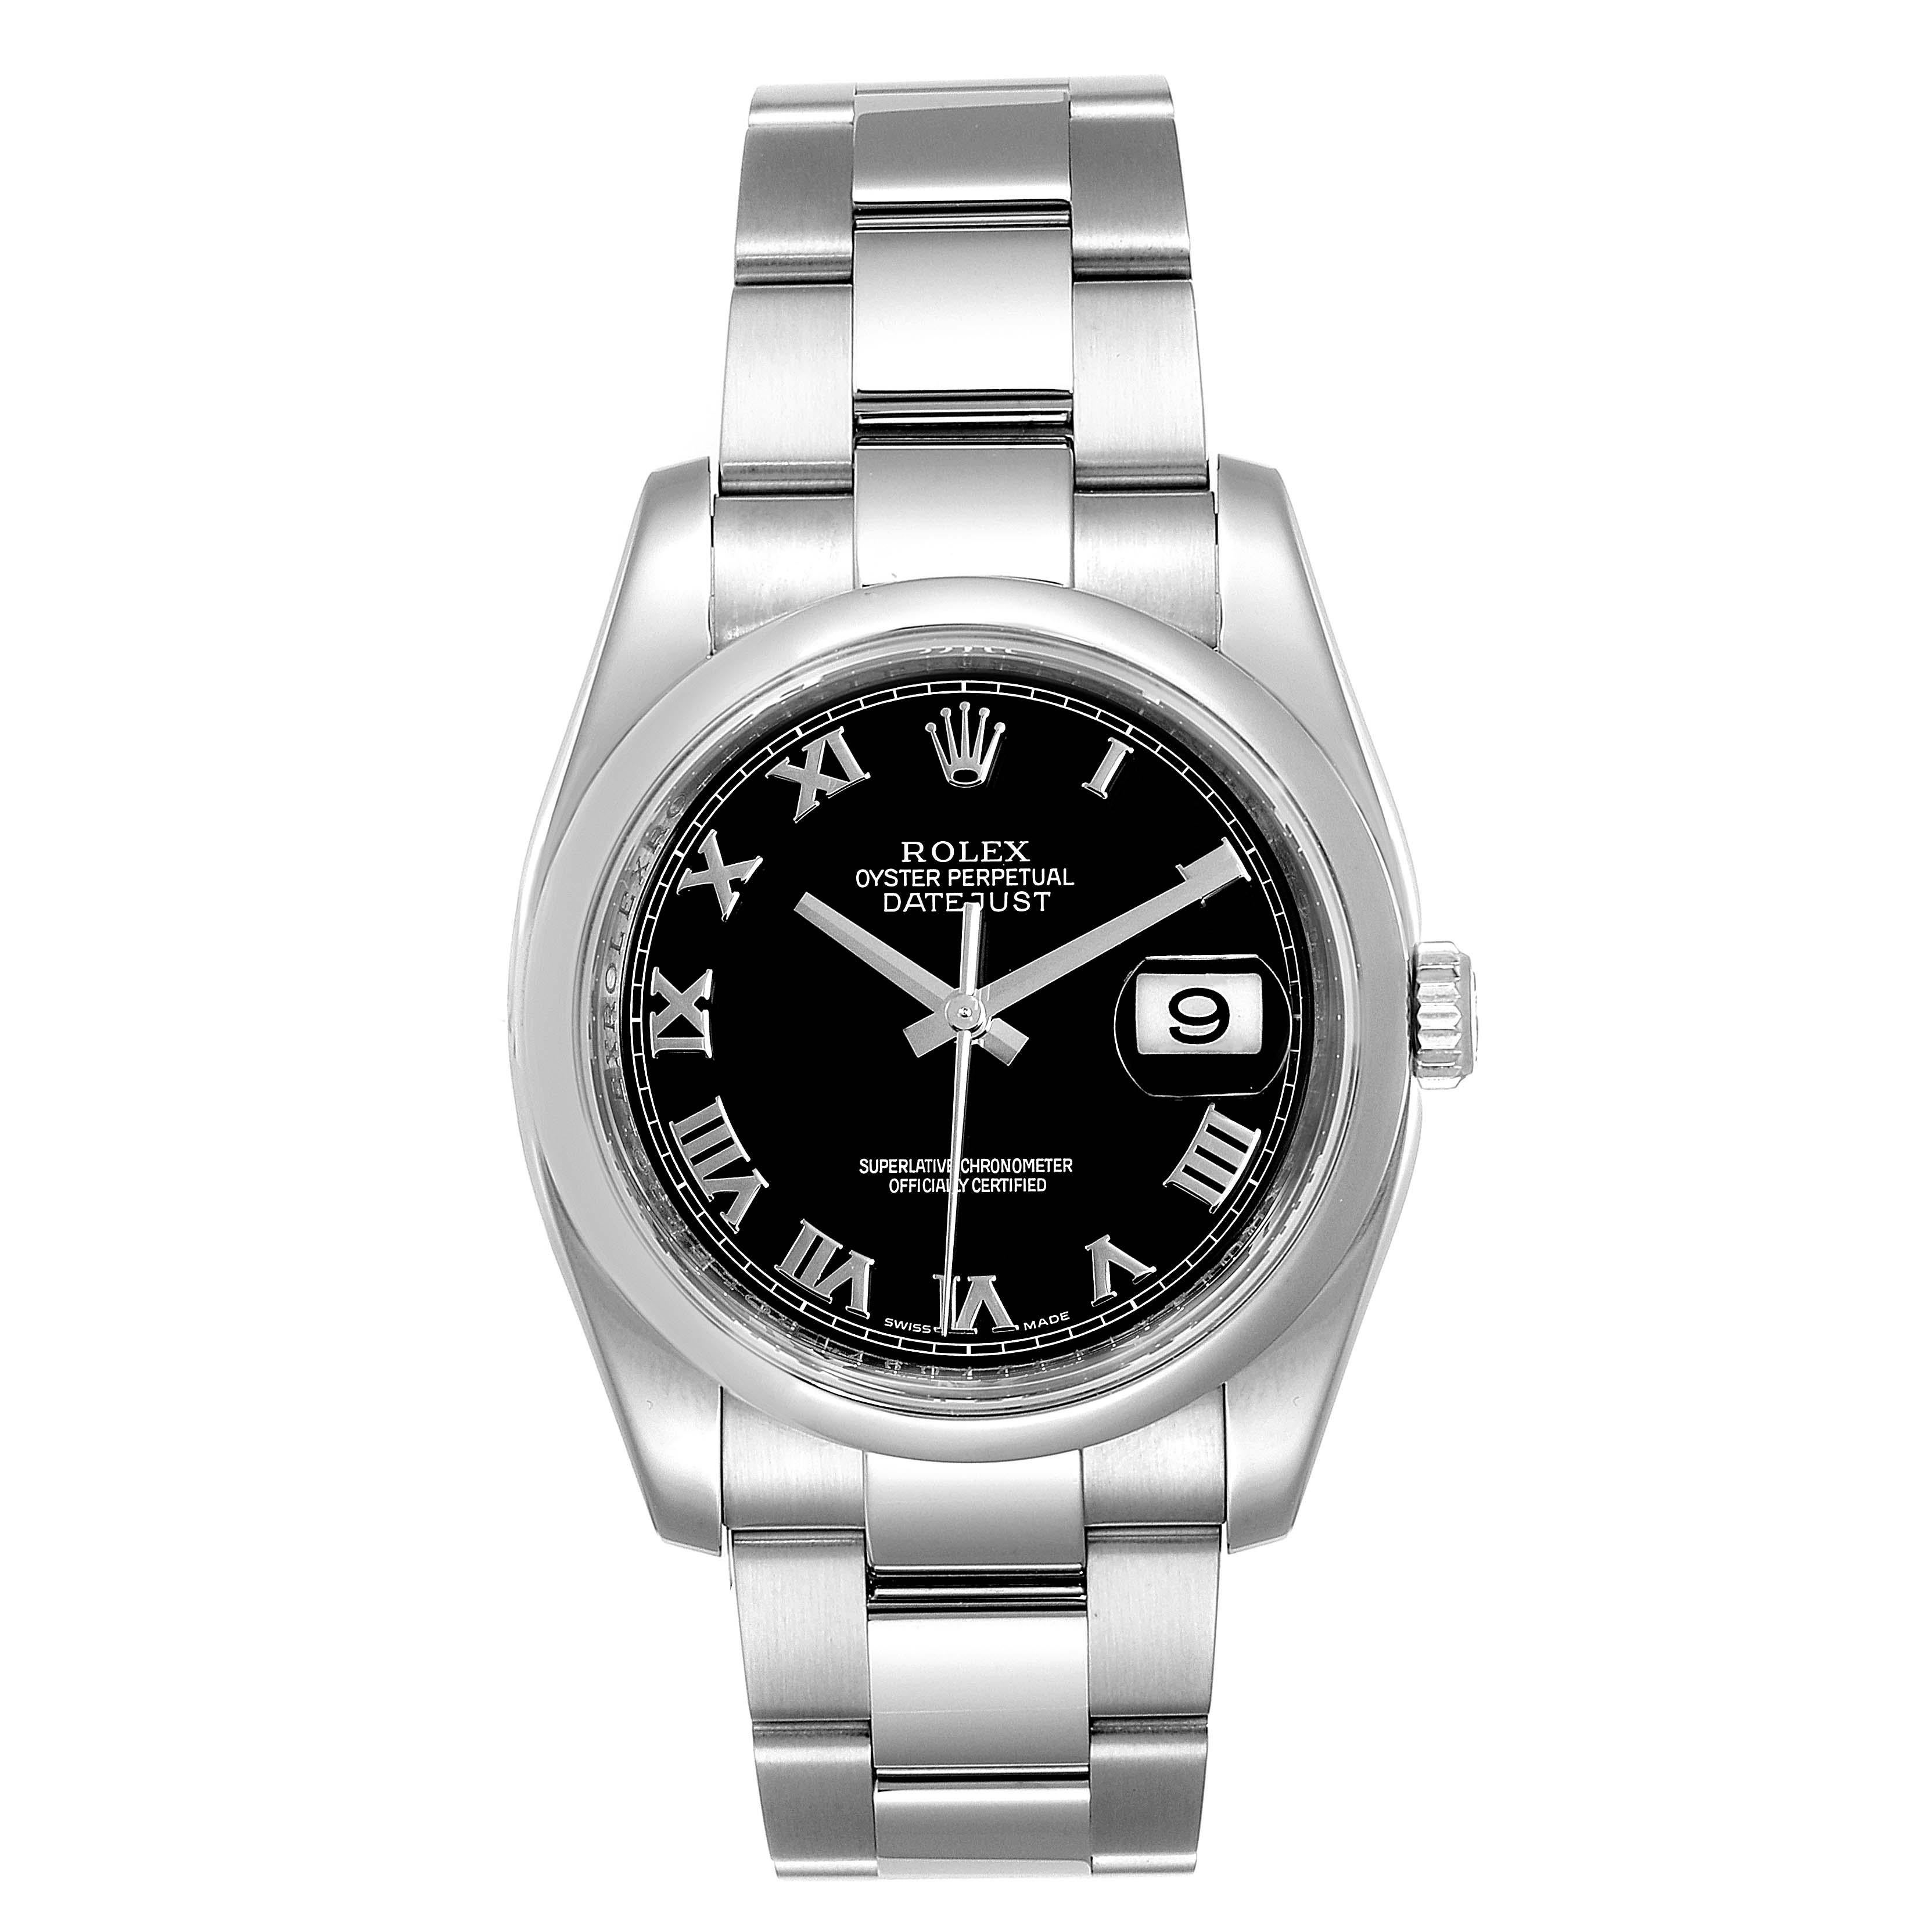 Rolex Datejust Black Roman Dial Steel Mens Watch 116200 Box Card. Officially certified chronometer self-winding movement with quickset date. Stainless steel case 36.0 mm in diameter. High polished lugs. Rolex logo on a crown. Stainless steel smooth